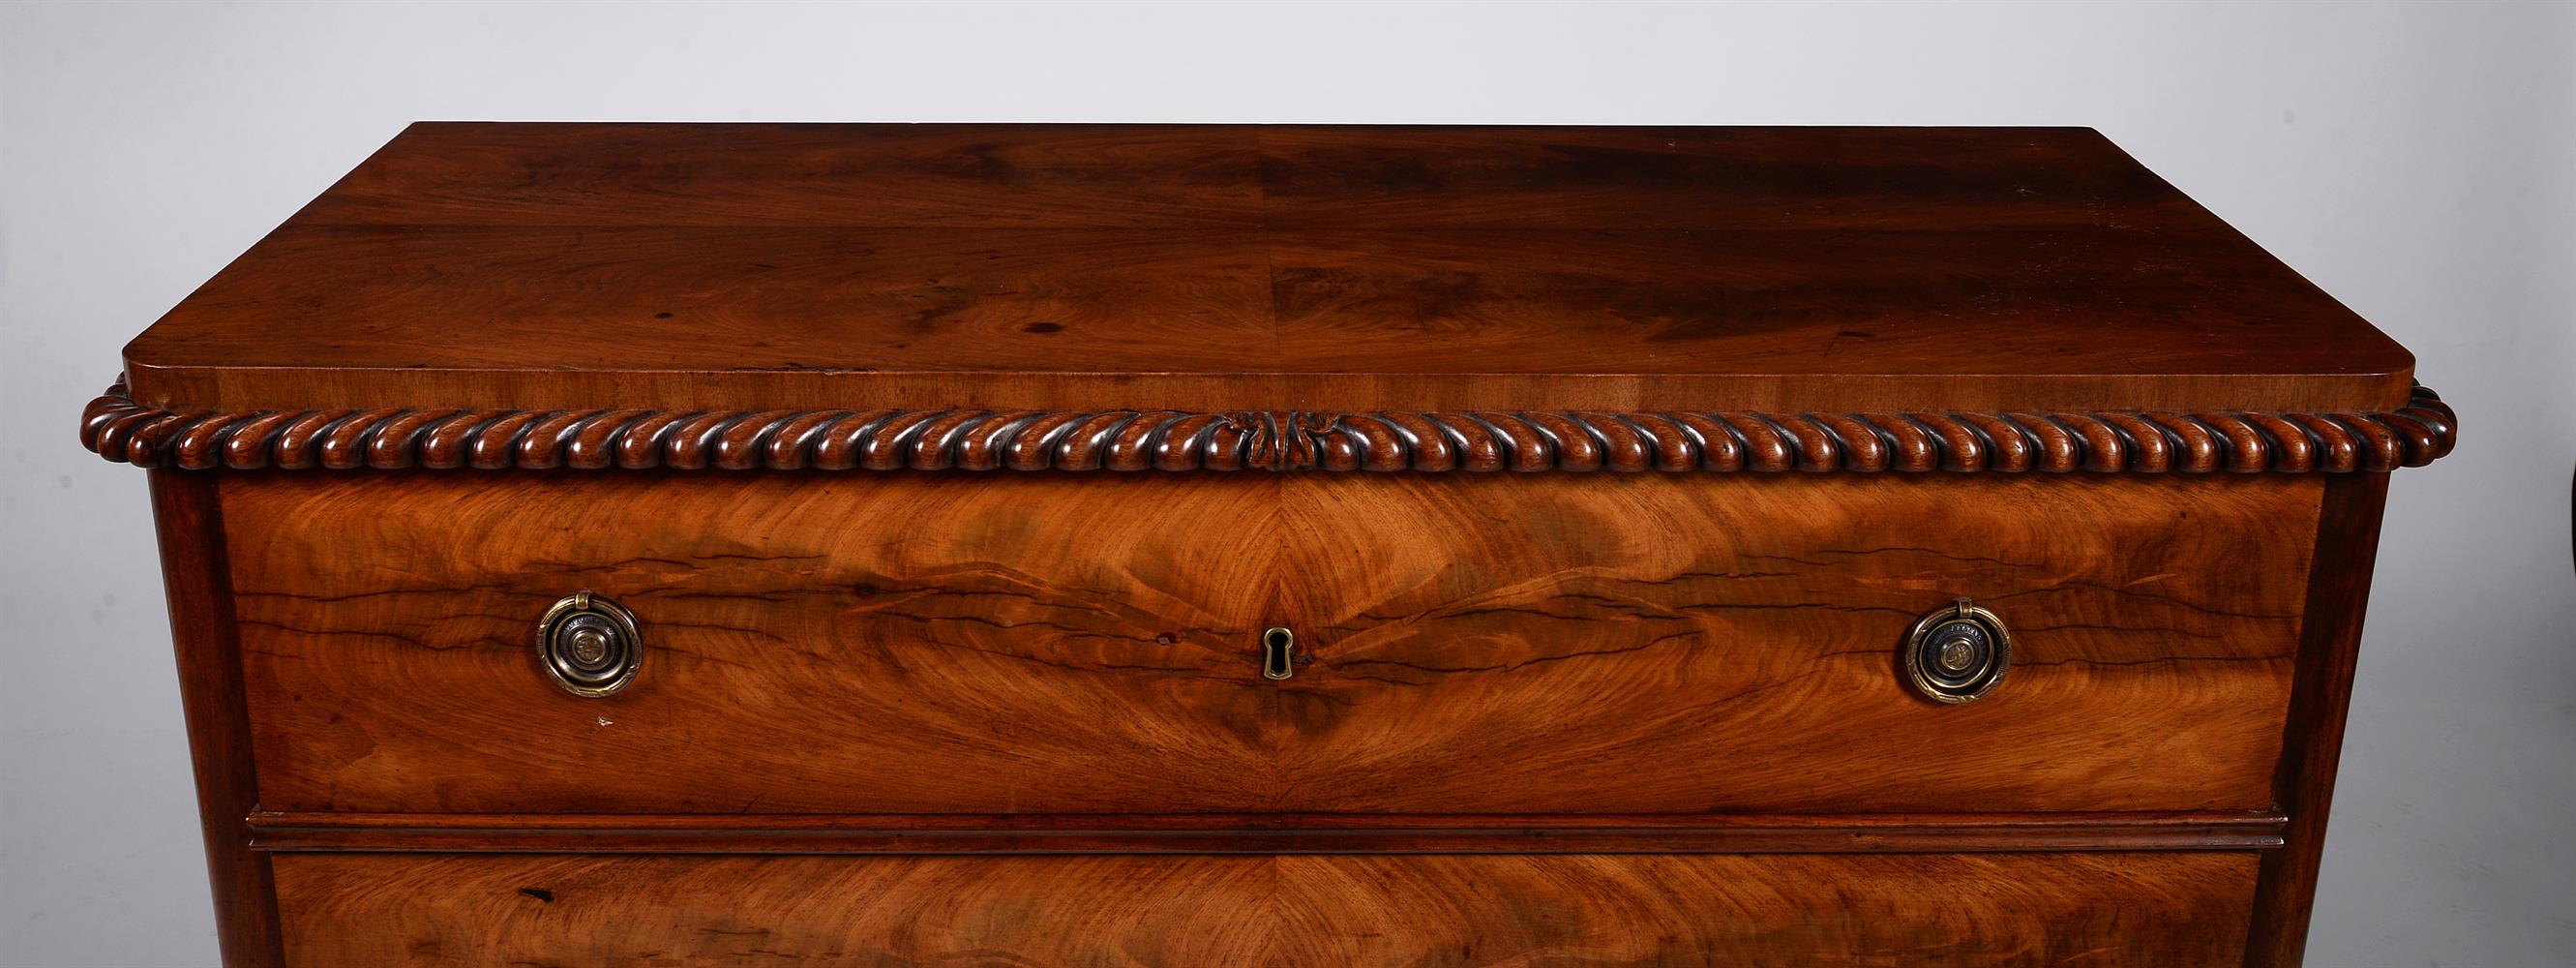 A Victorian mahogany chest of drawers in Louis Philippe taste - Image 2 of 3